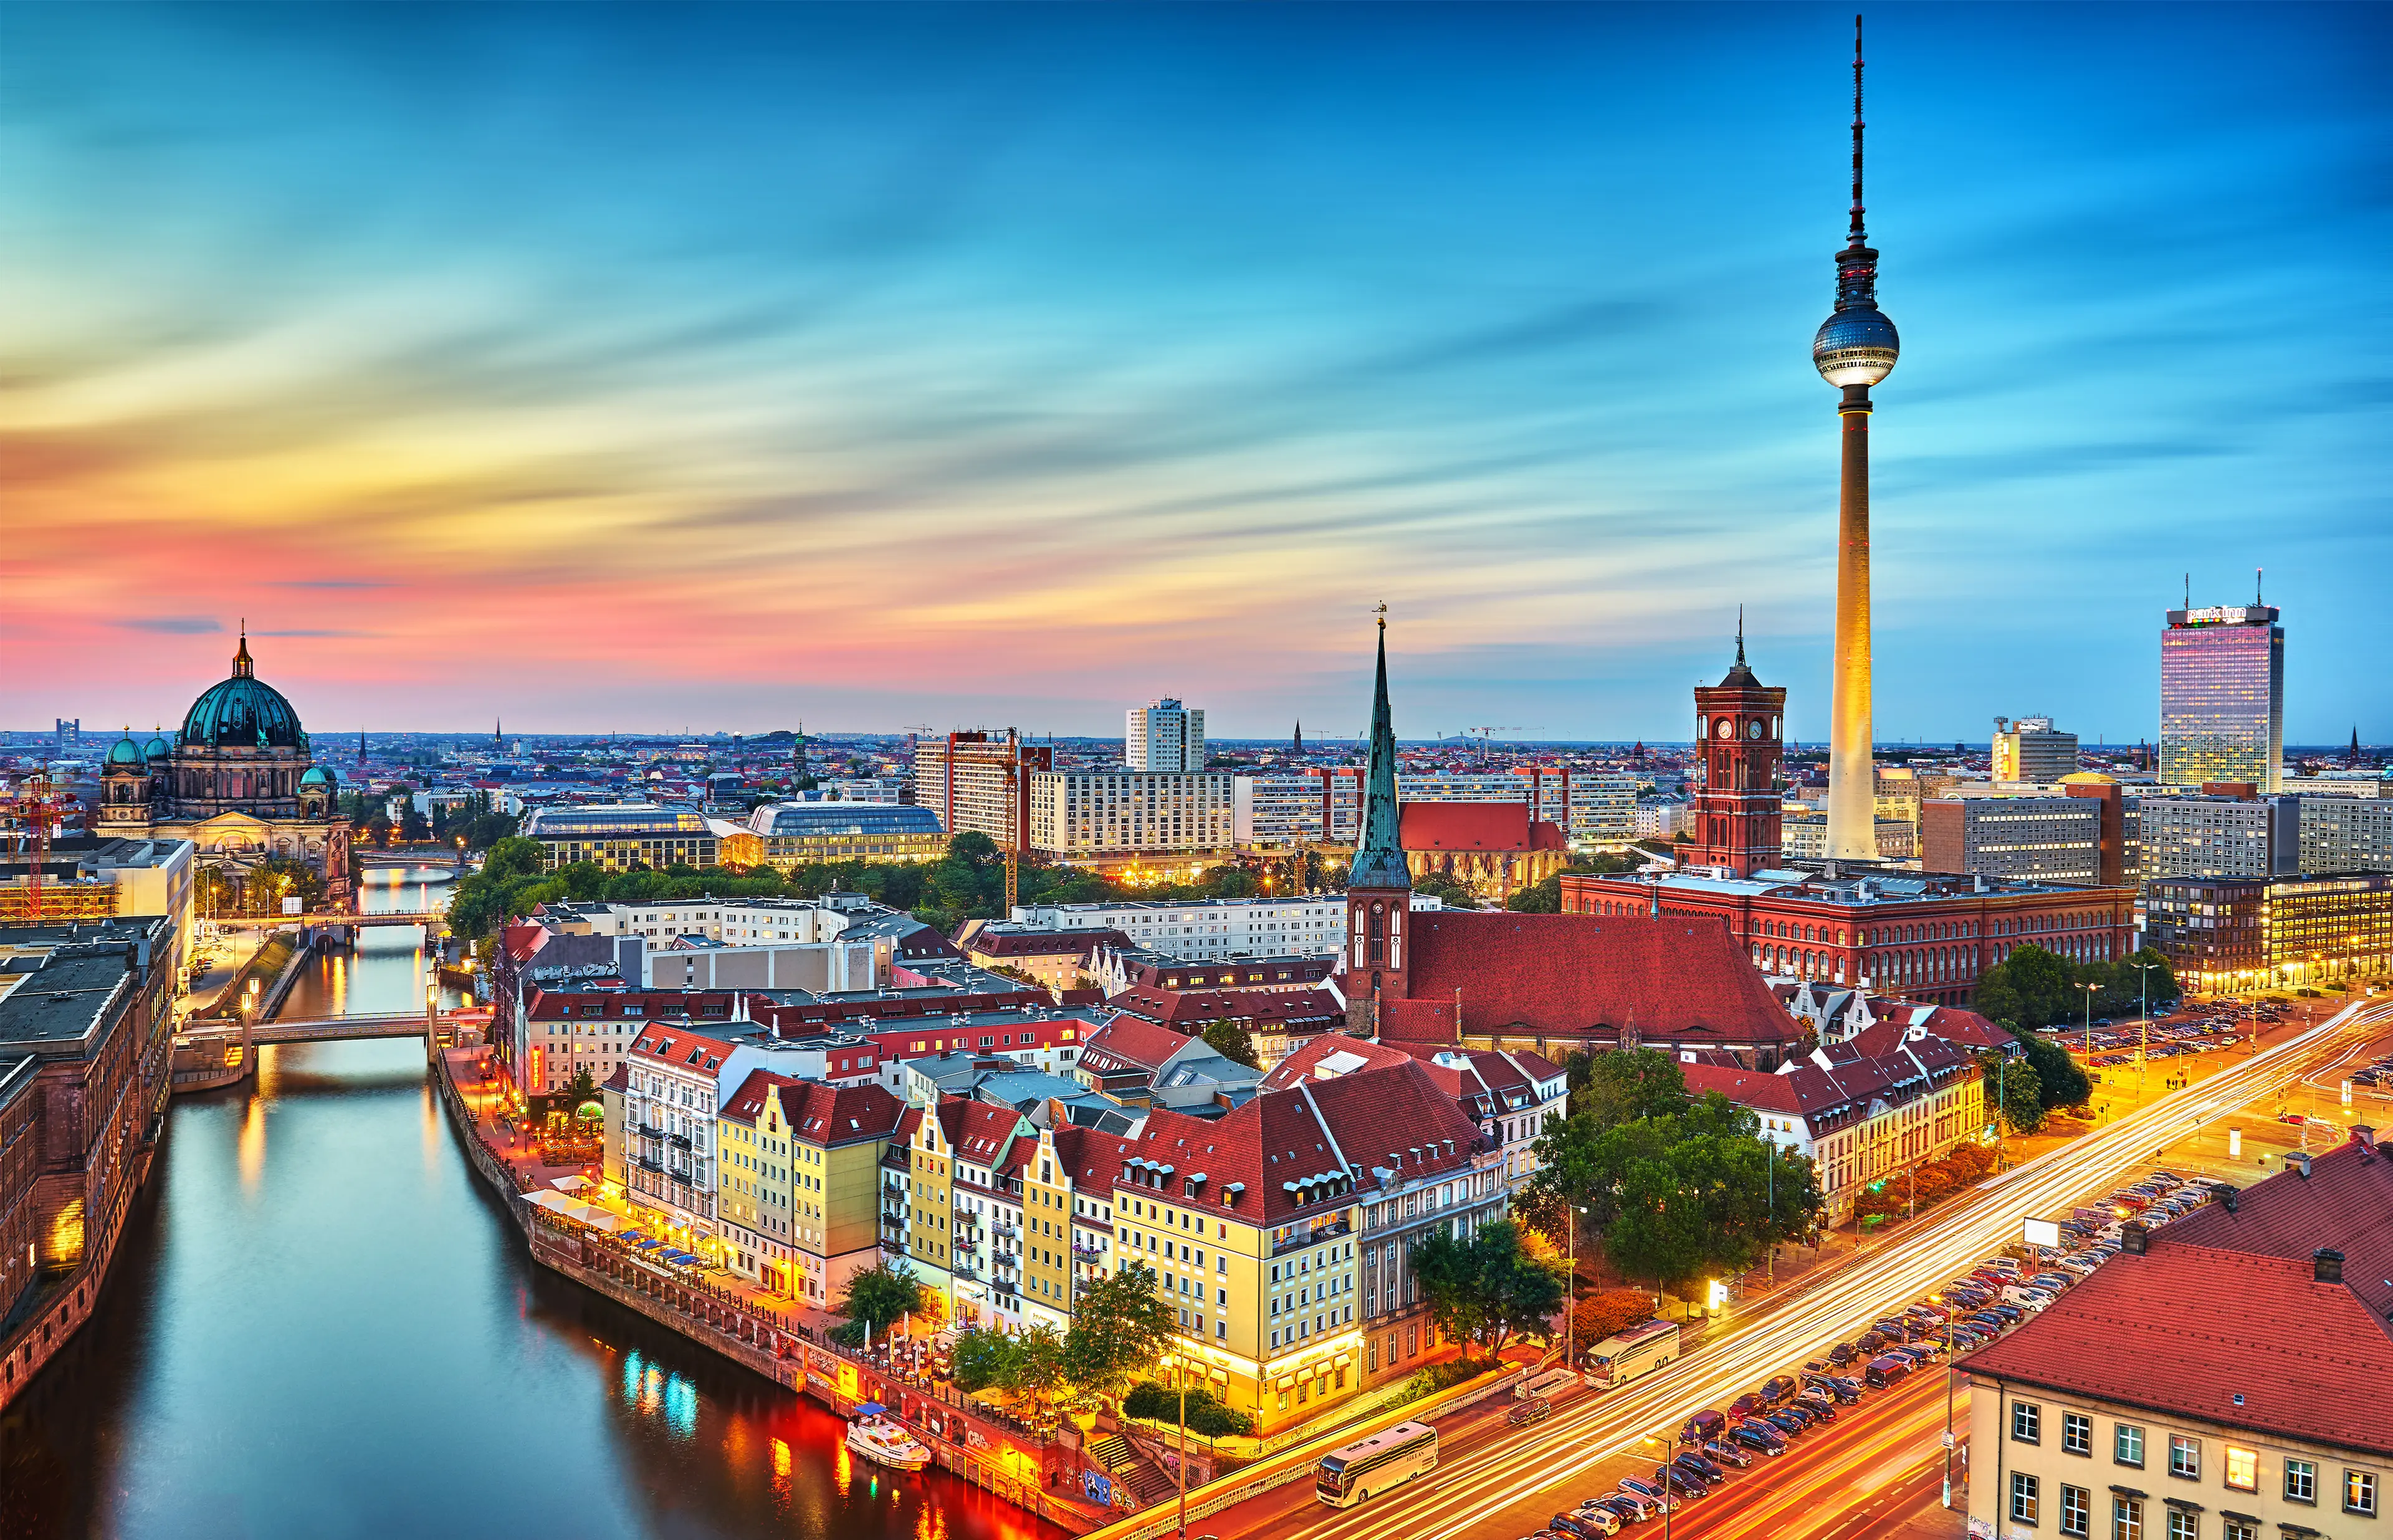 1-Day Berlin Adventure: Unexplored Paths with Friends